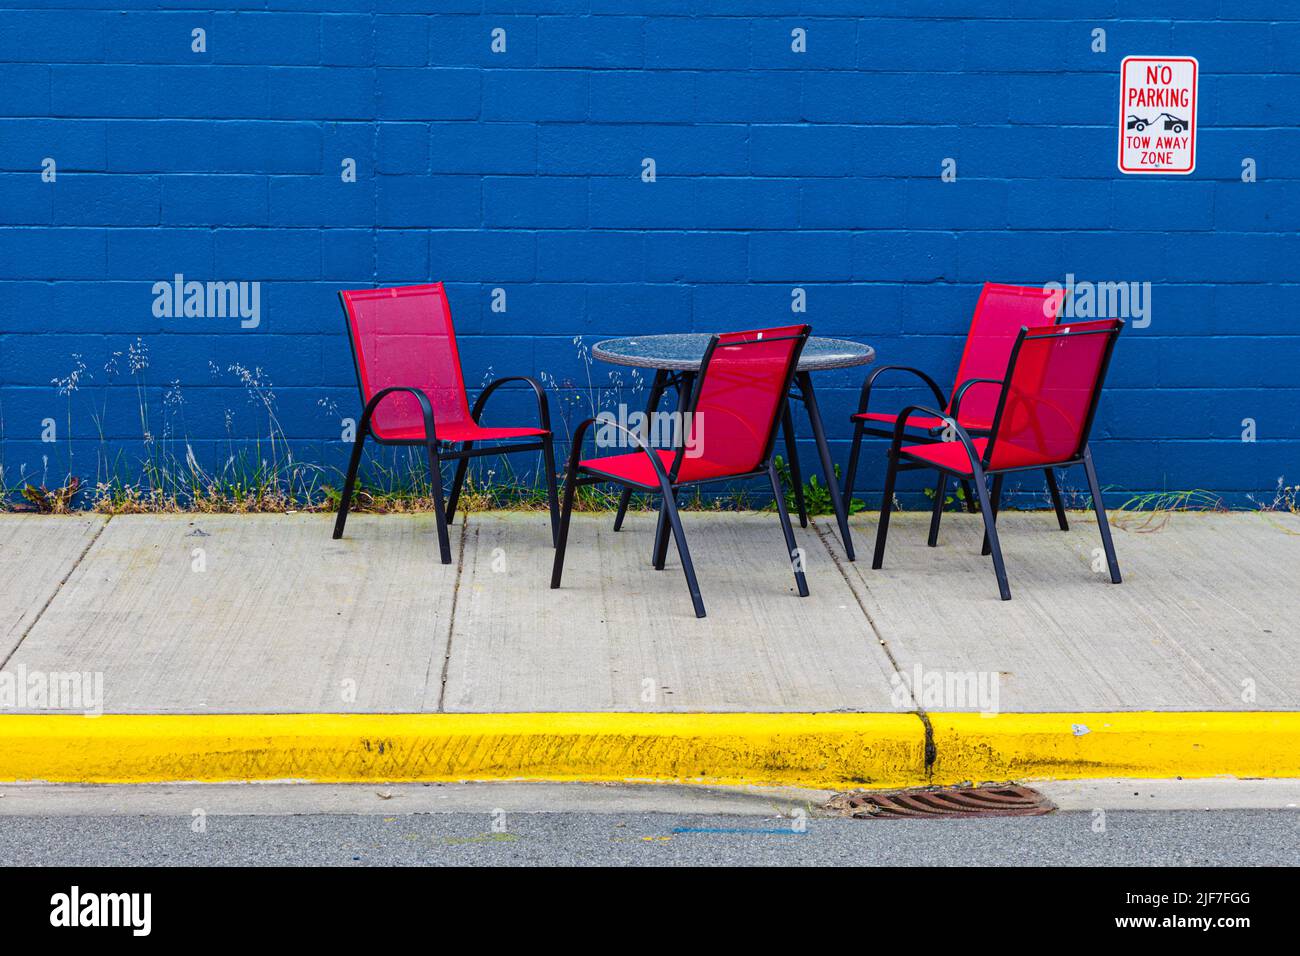 Table with red chairs against a blue wall in Steveston British Columbia Canada Stock Photo